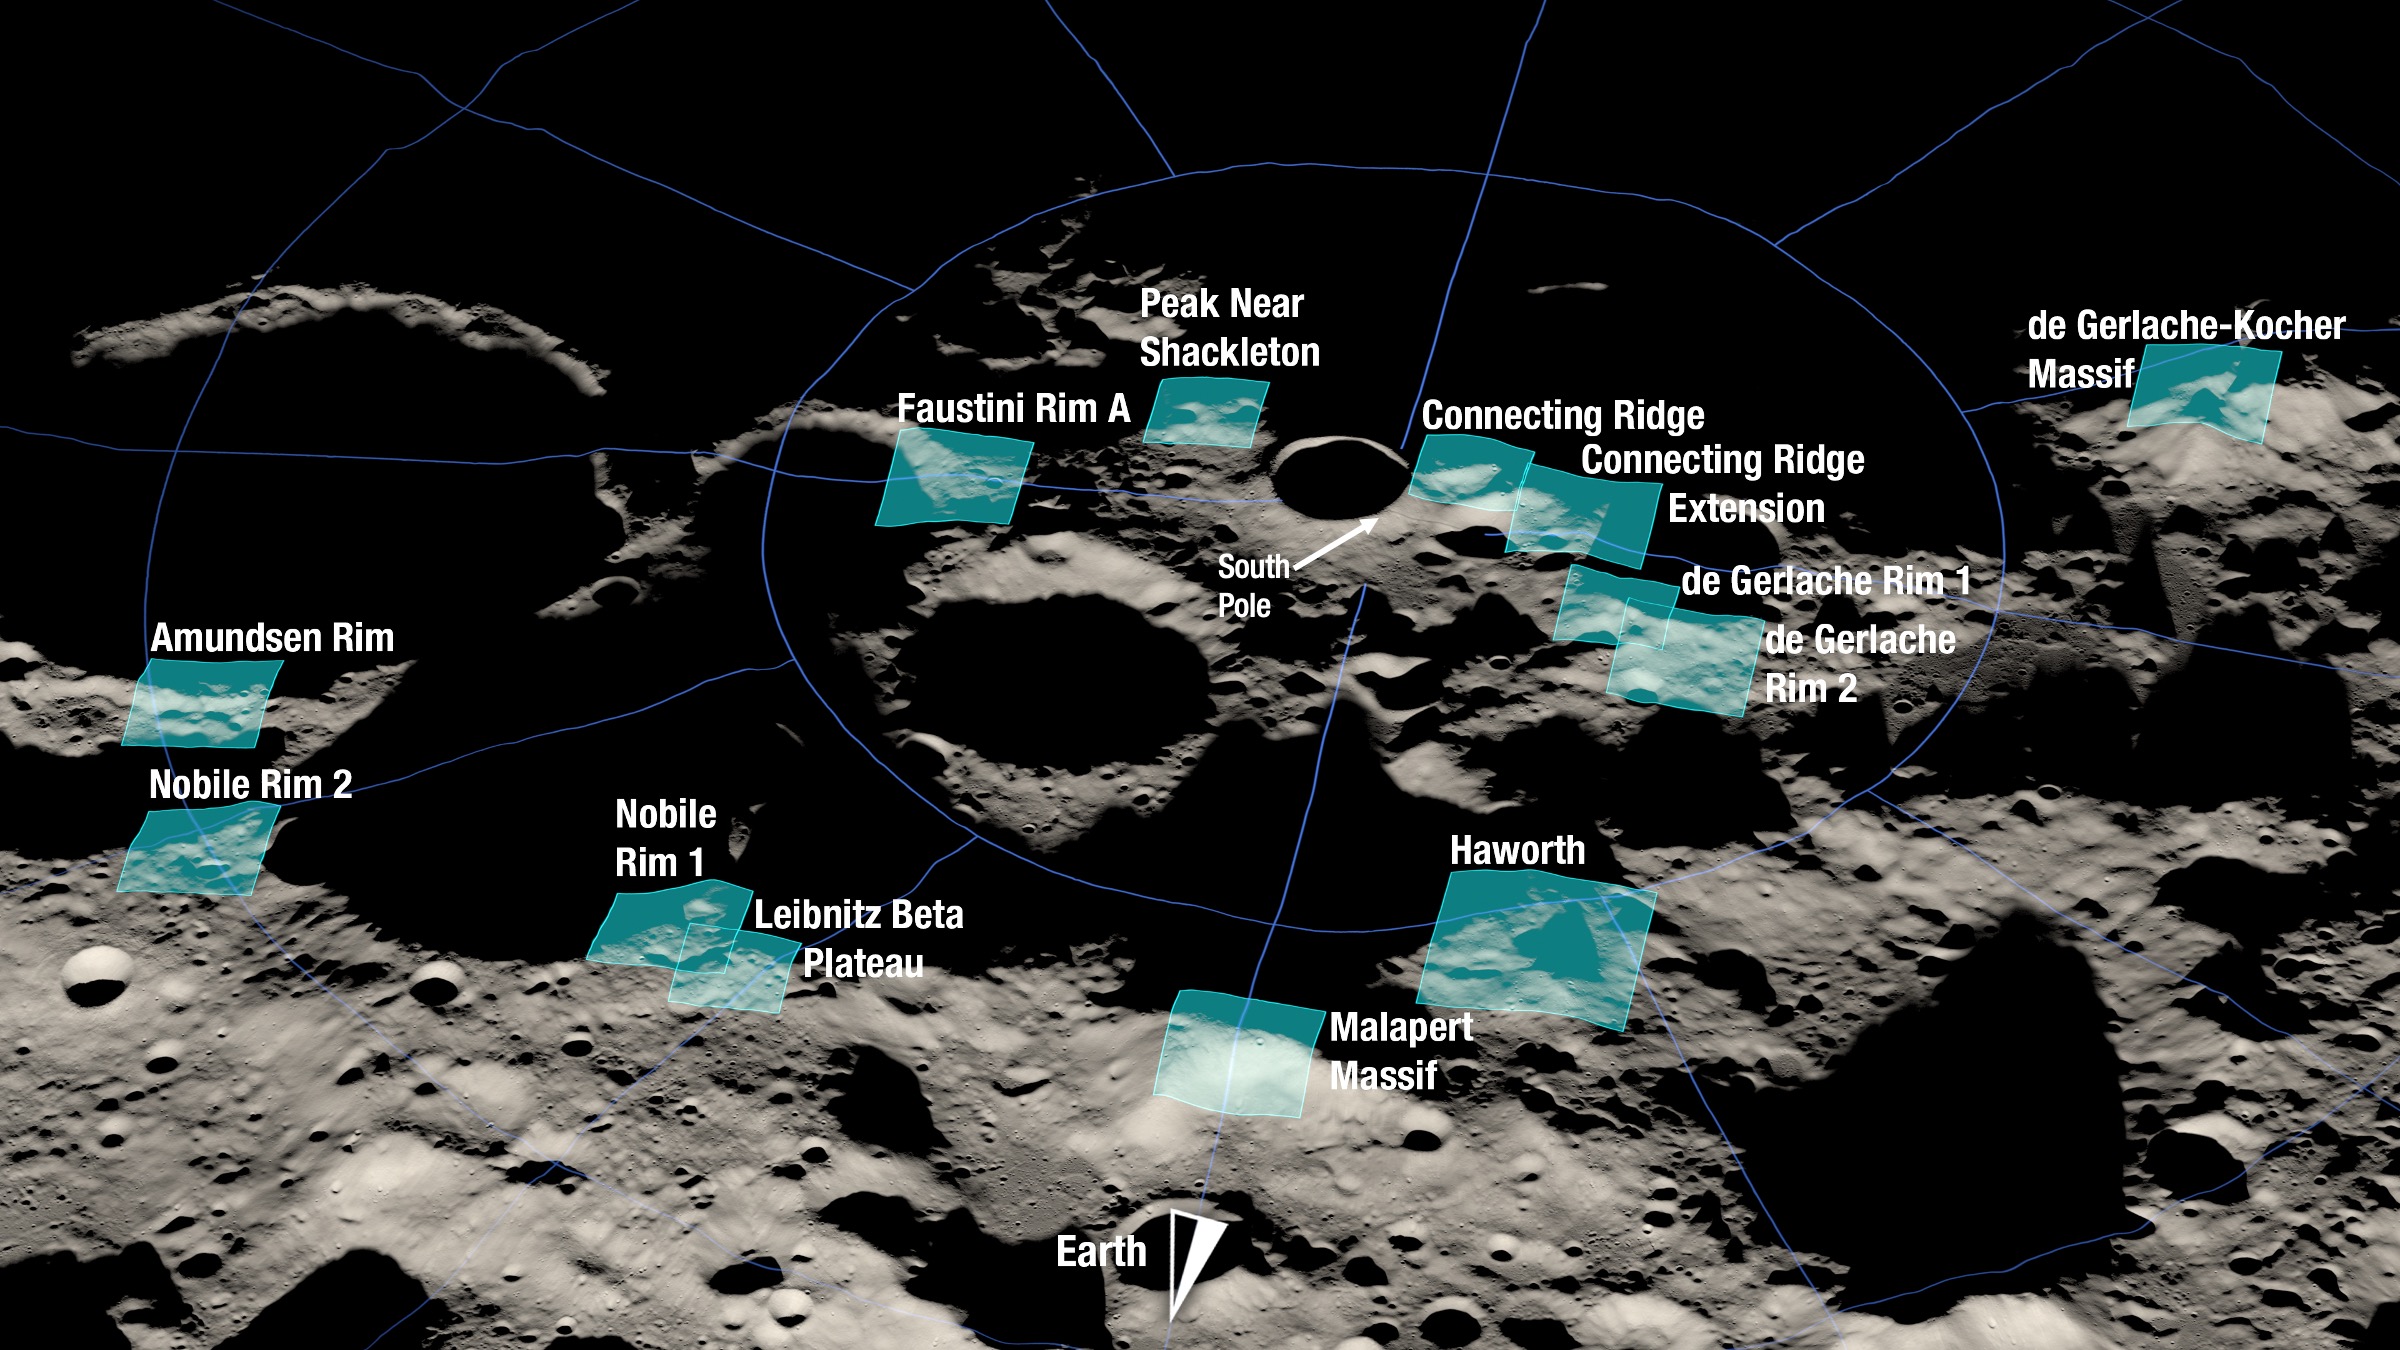 Here is Where Astronauts Might Land on the Moon